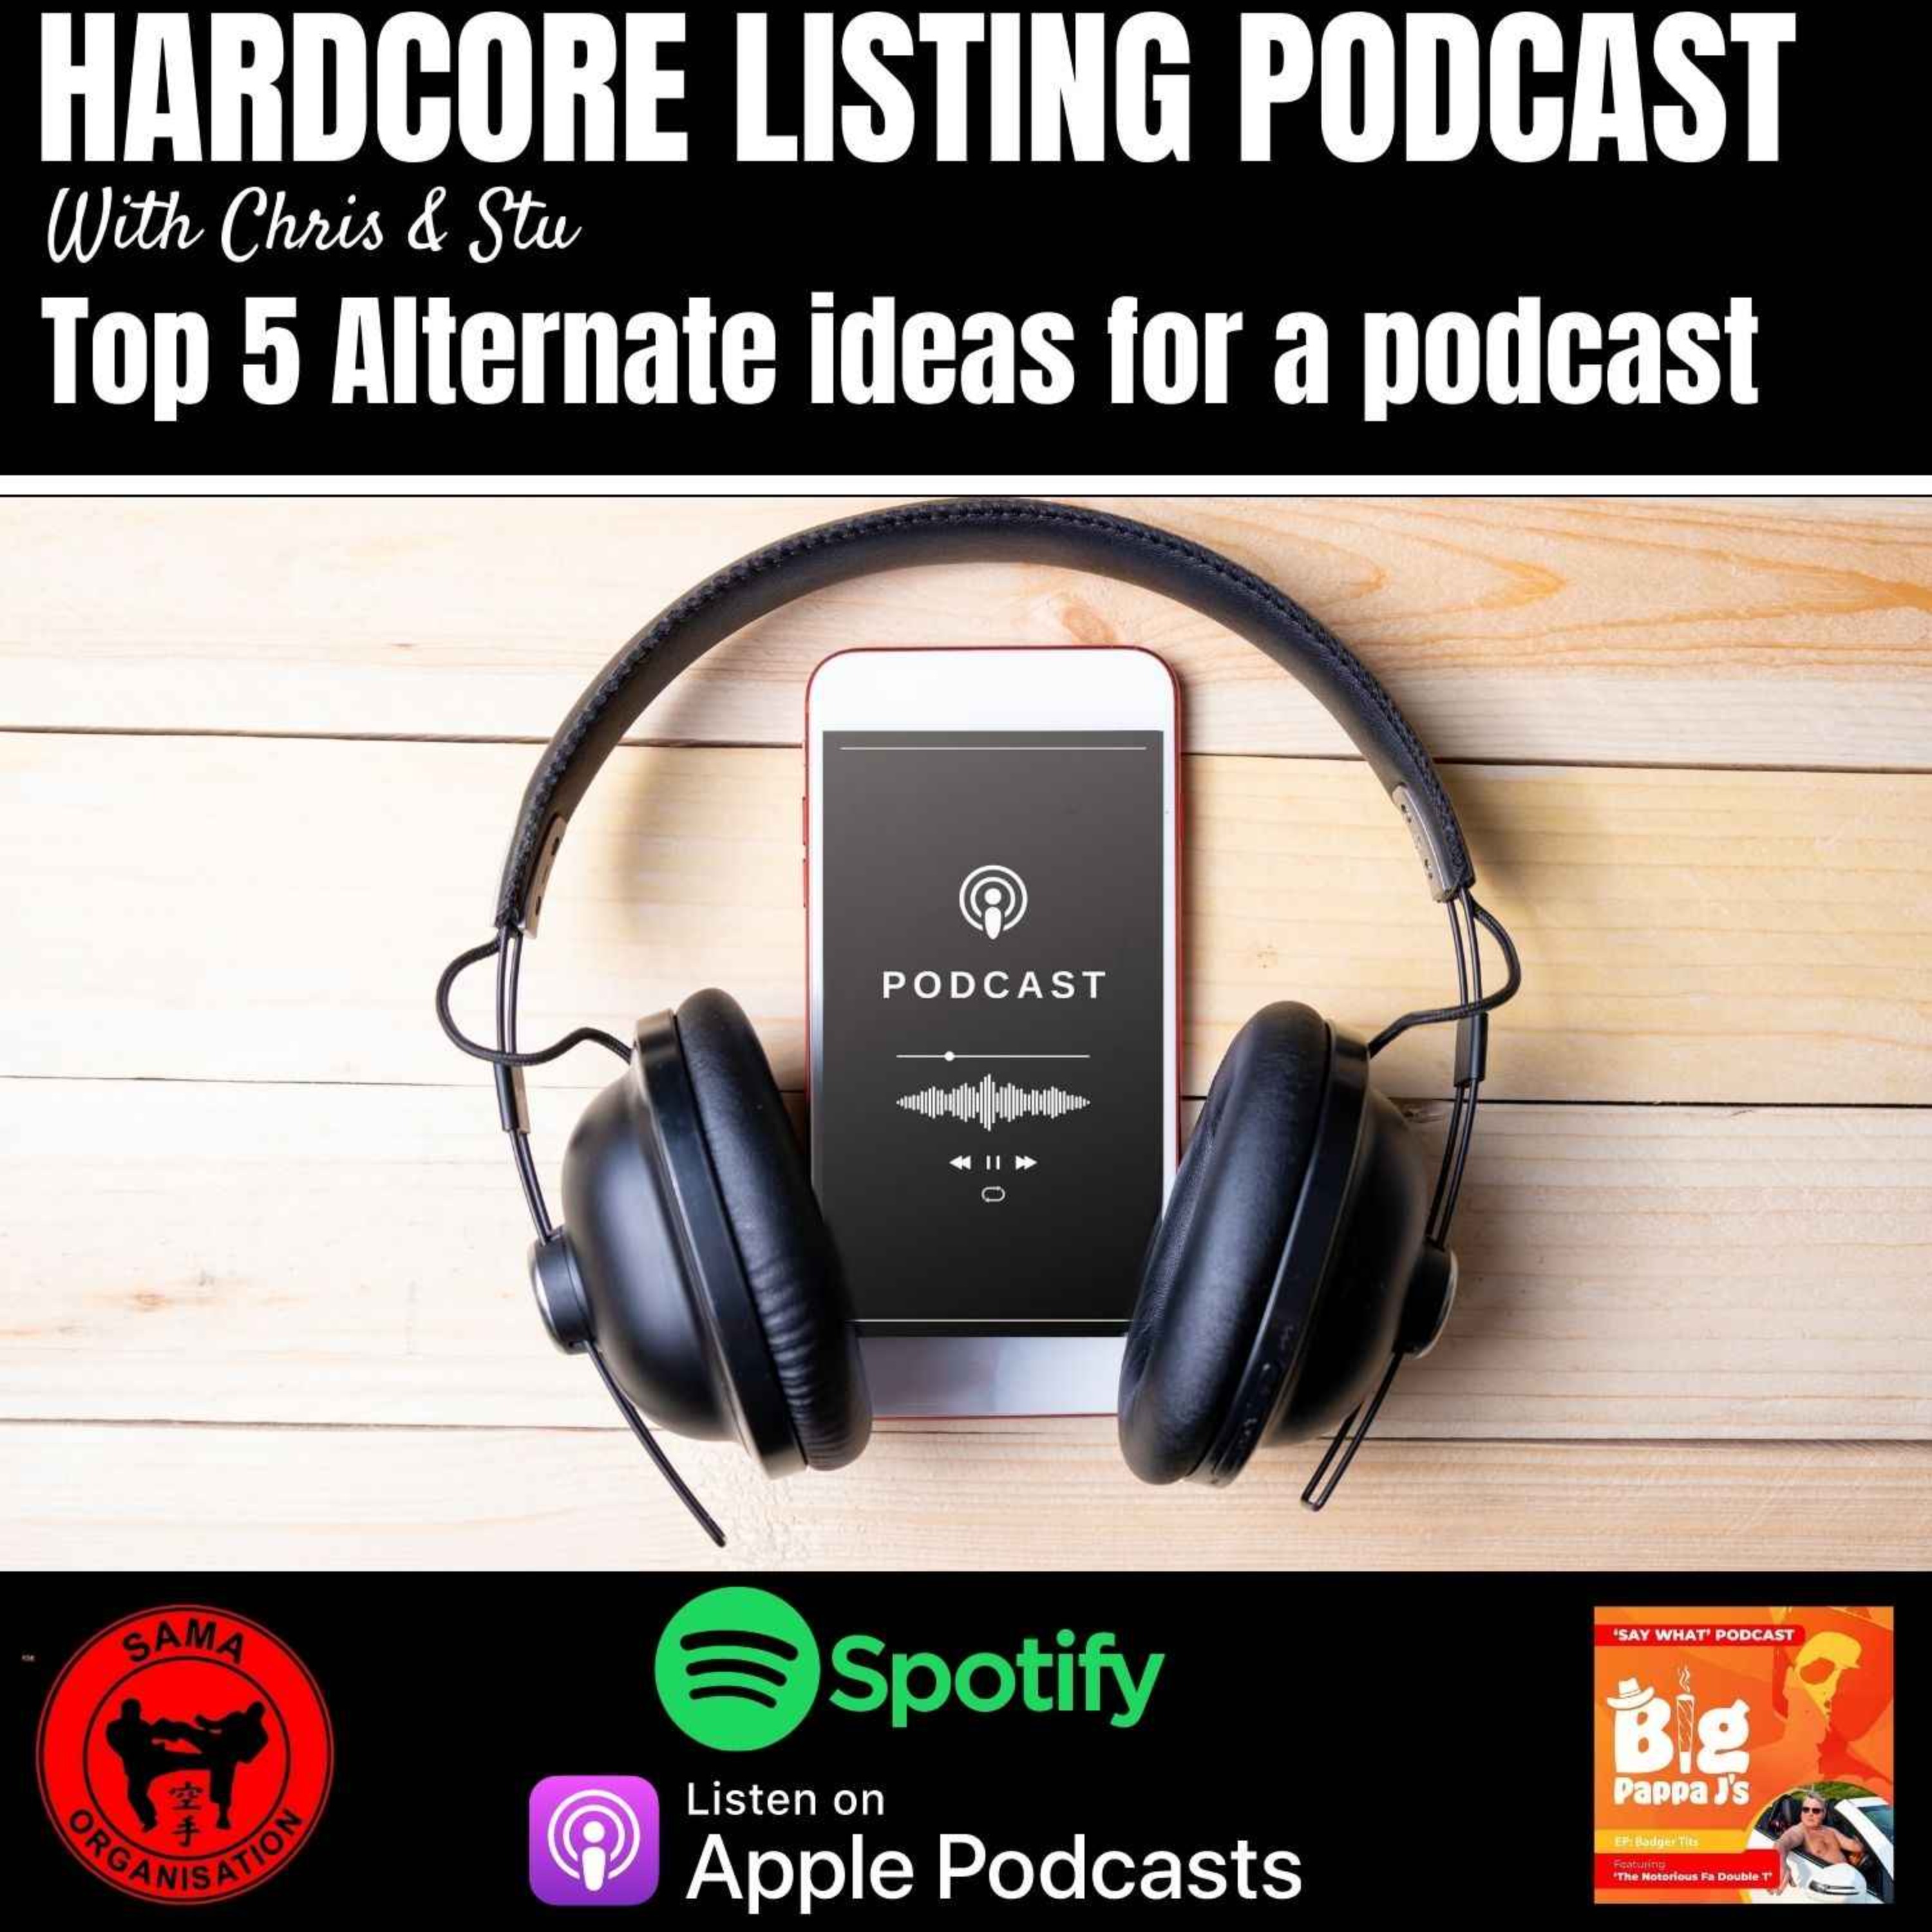 Top 5 Alternate ideas for a podcast